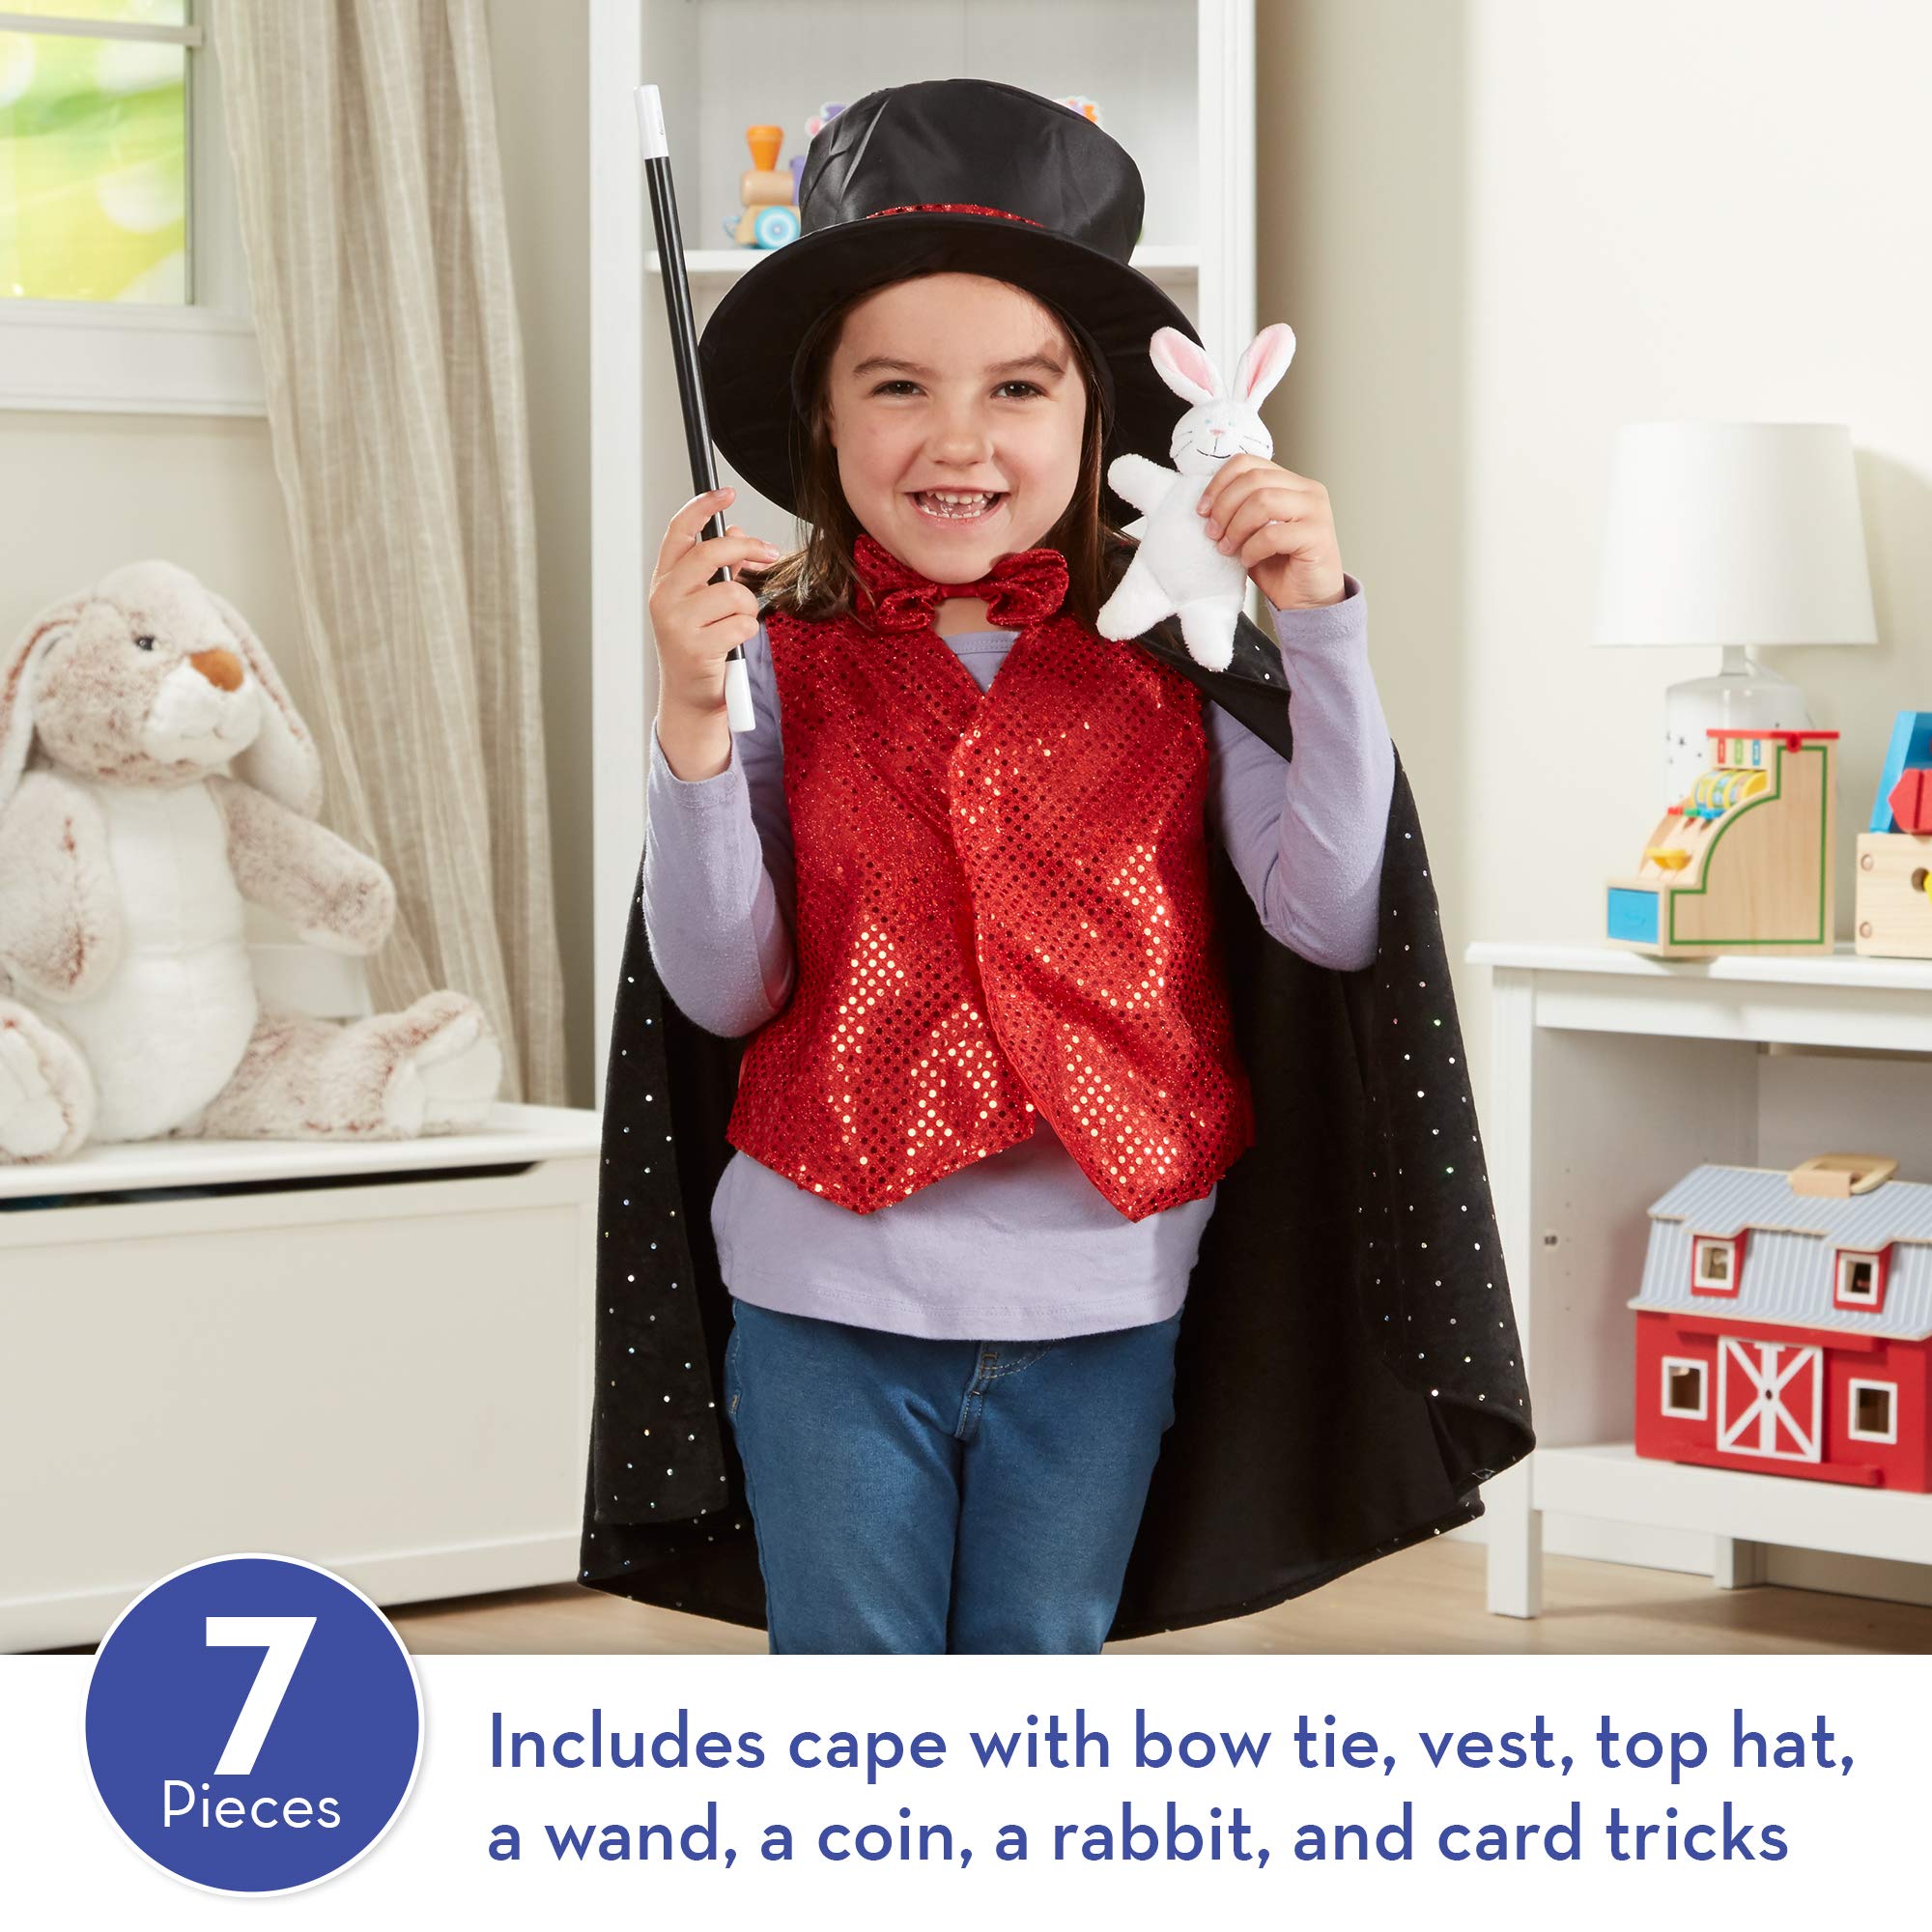 Melissa & Doug Magician Role Play Costume Set - Includes Hat, Cape, Wand, Magic Tricks Frustration-Free Packaging